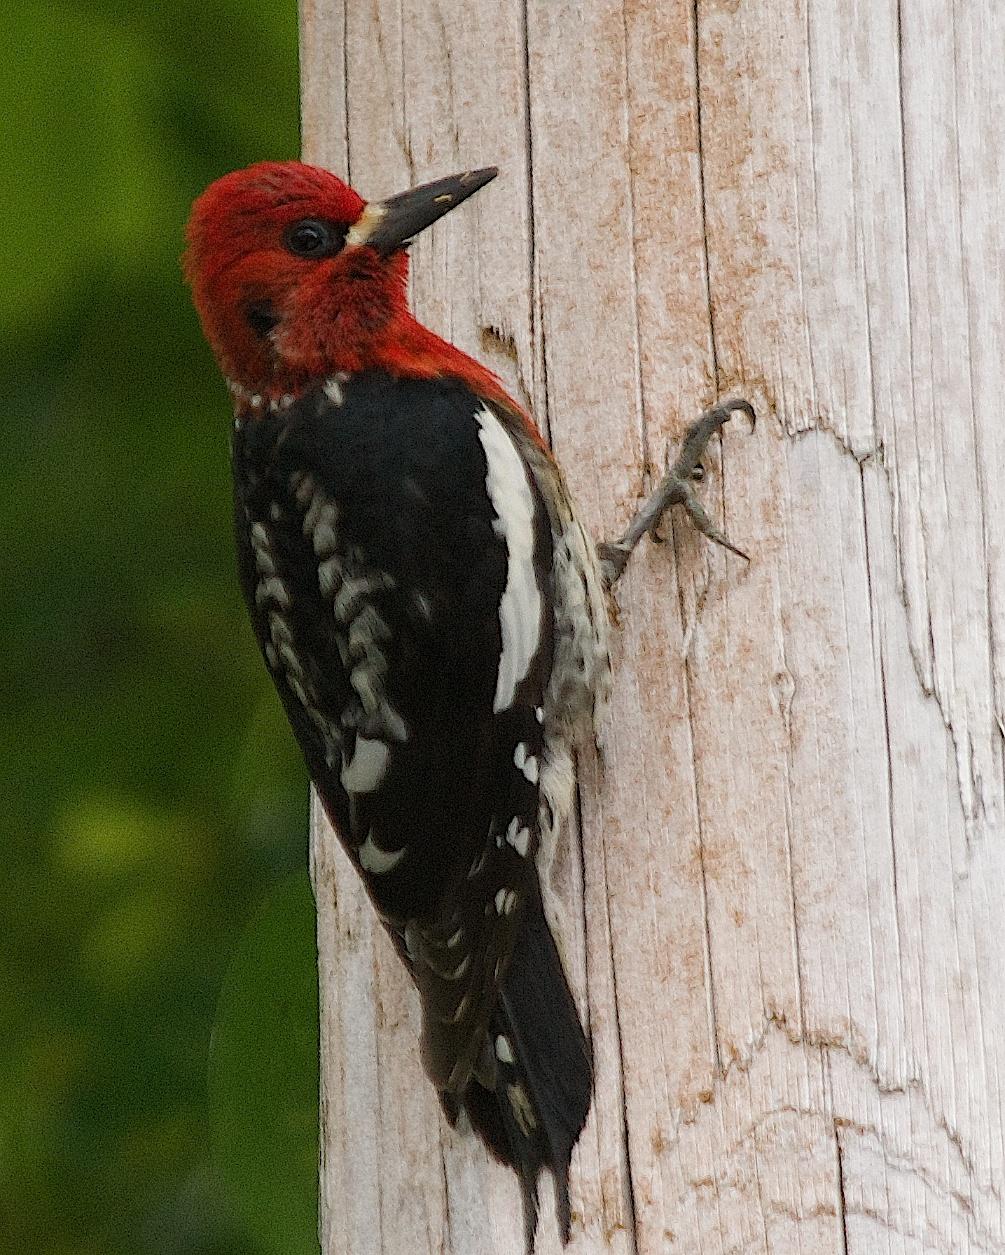 Red-breasted Sapsucker Photo by Gerald Hoekstra